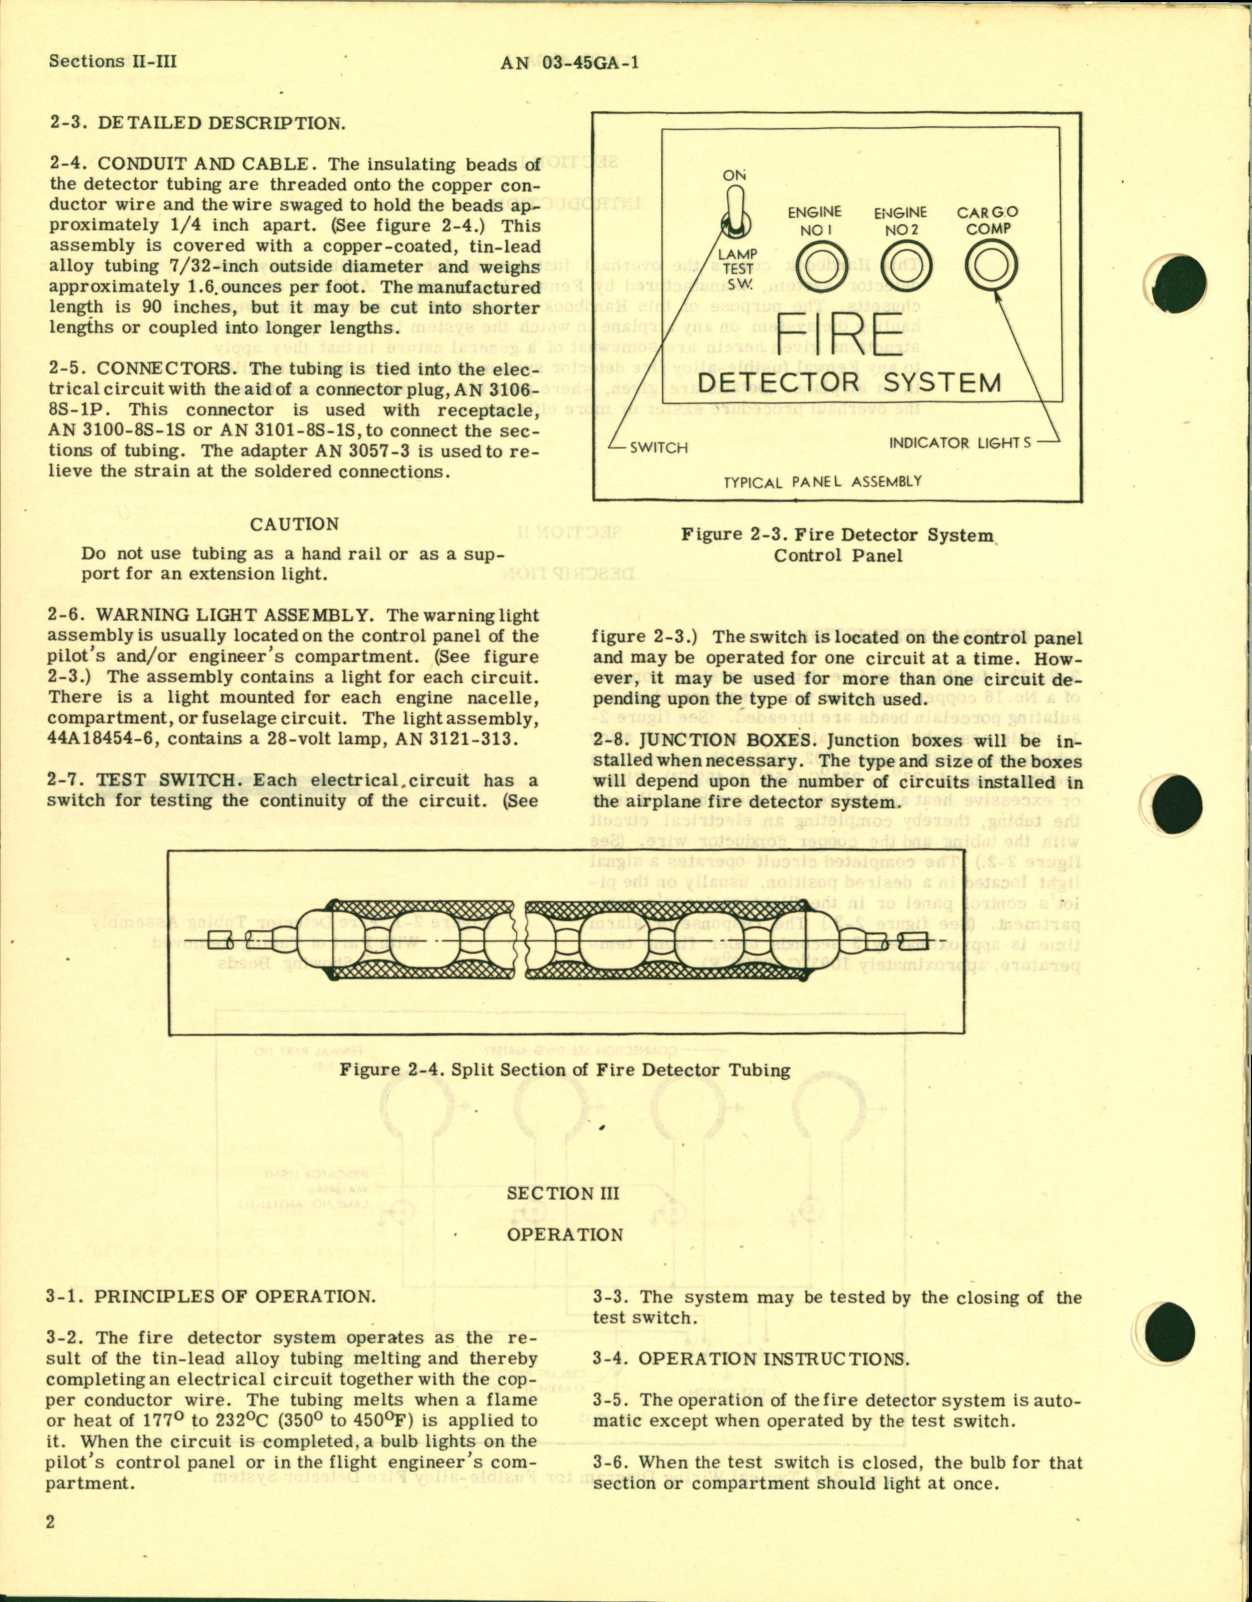 Sample page 5 from AirCorps Library document: Overhaul Instructions for Fusible Alloy Fire Detector System